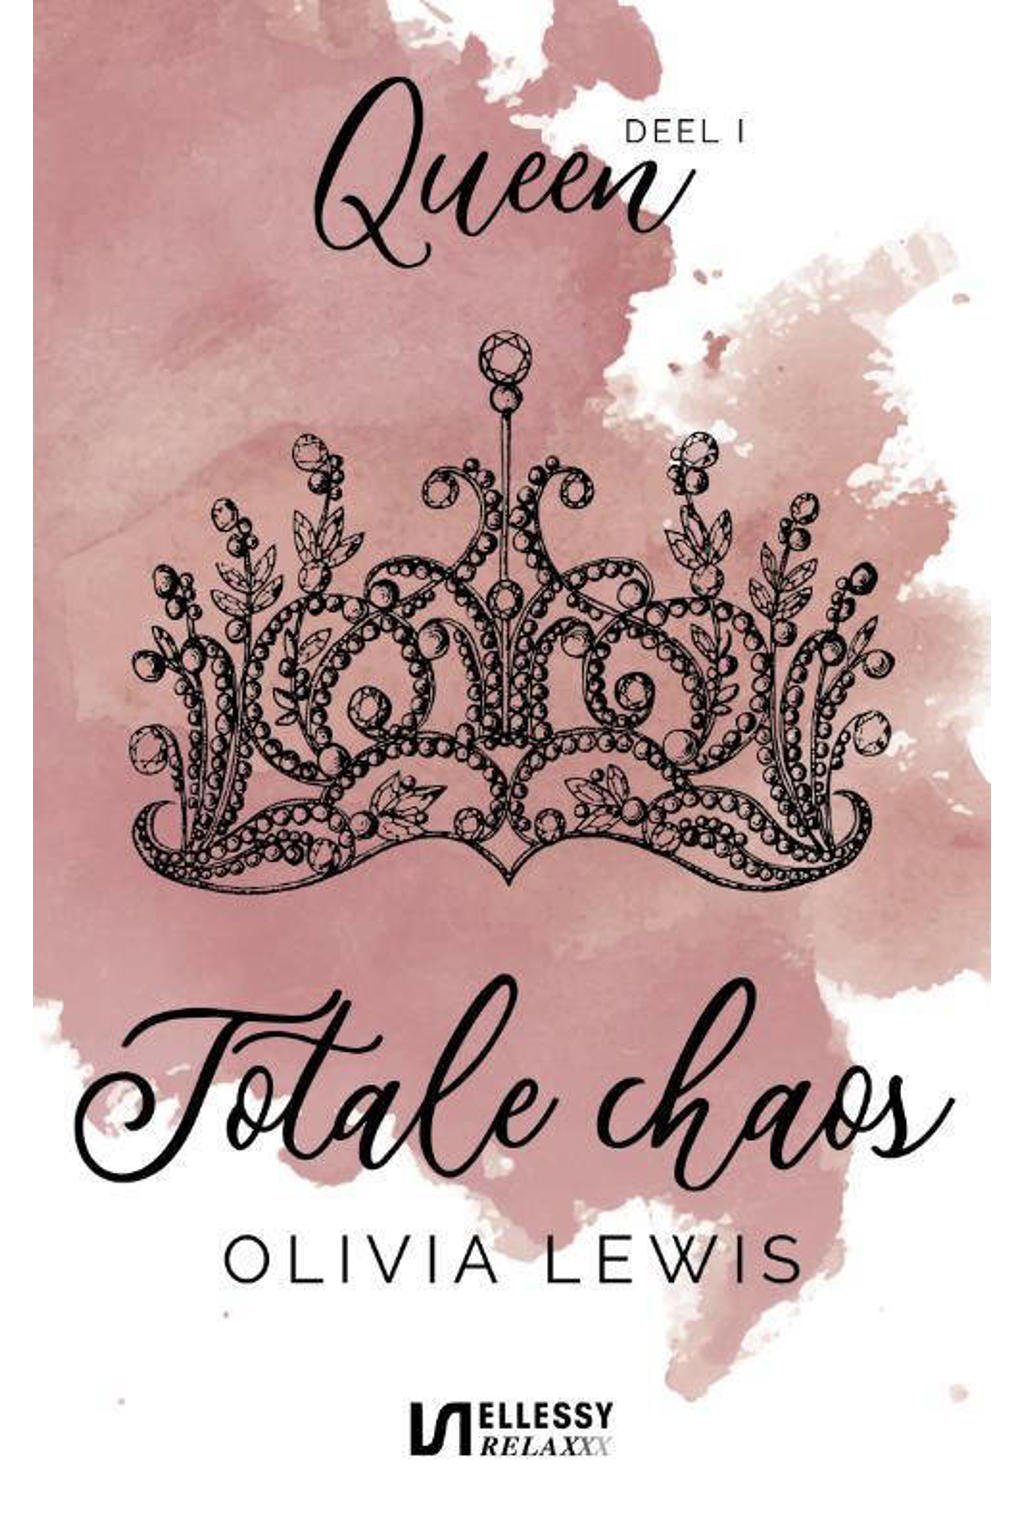 Queen: Totale chaos - Olivia Lewis